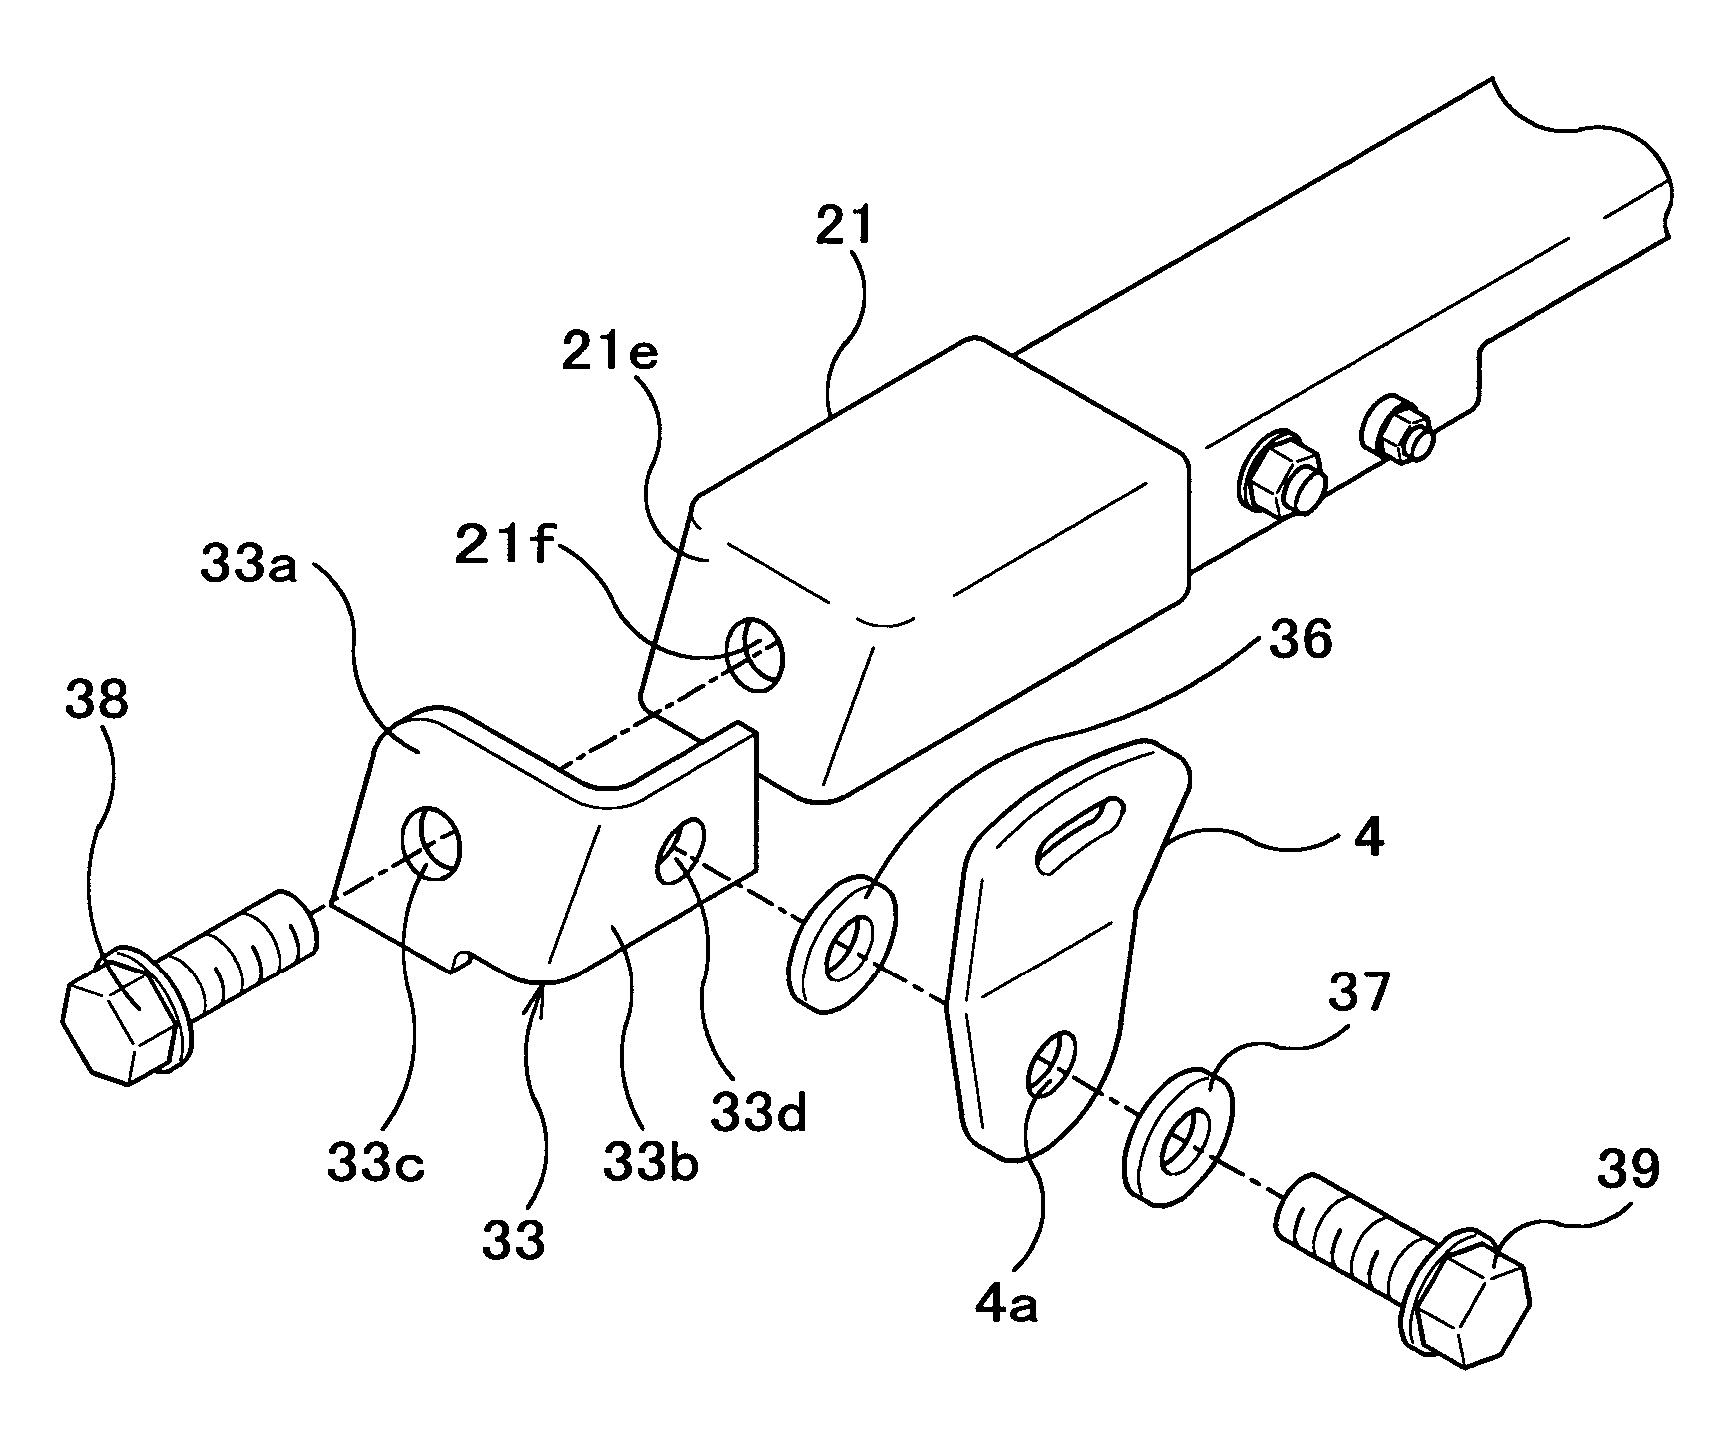 Attaching structure for a seatbelt apparatus